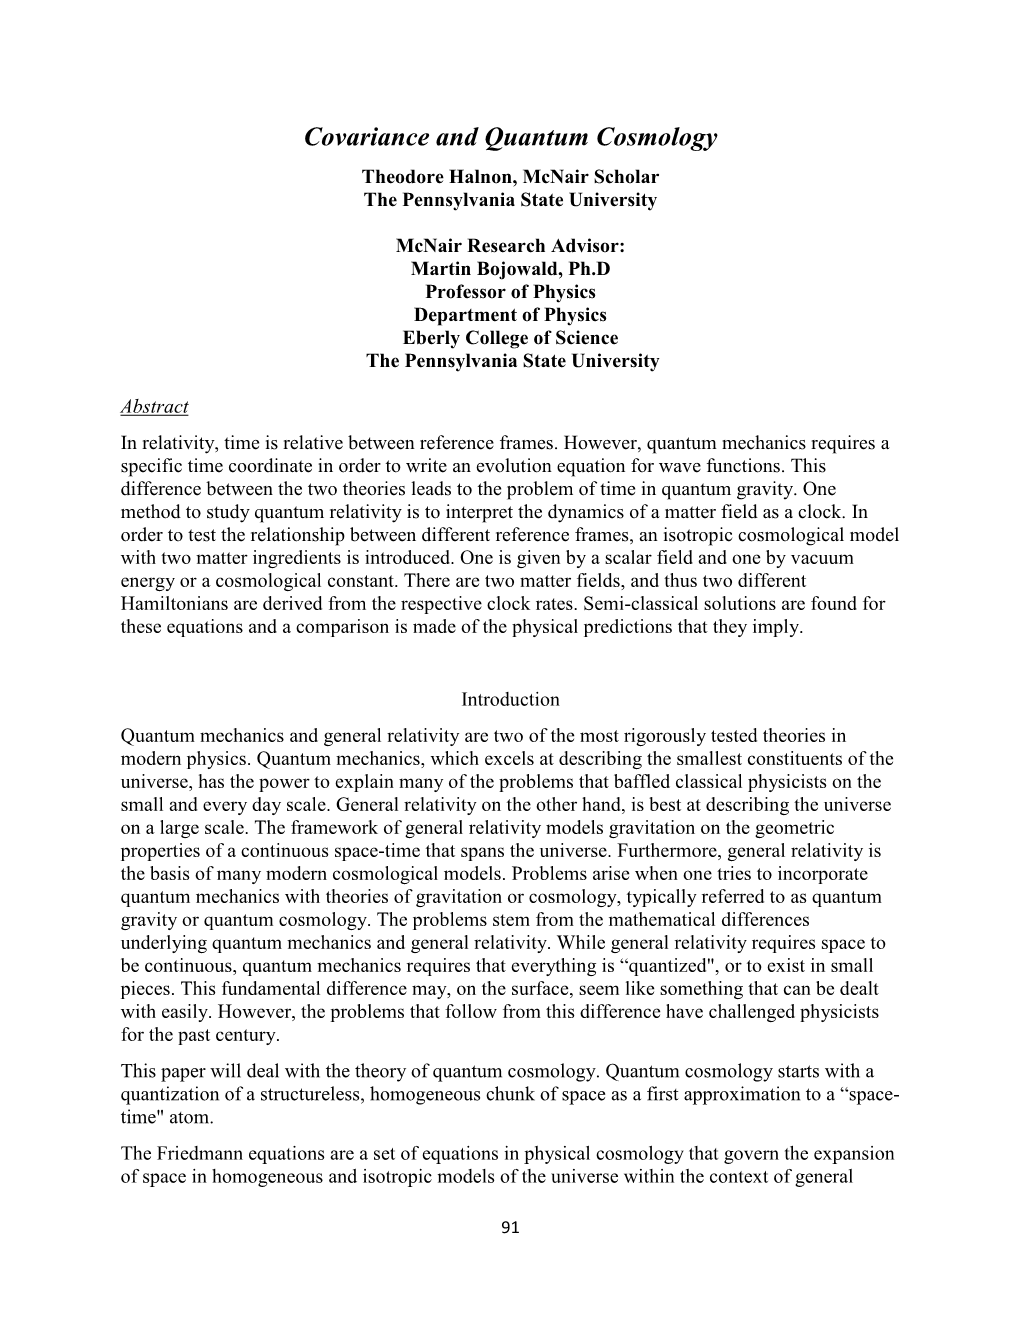 Covariance and Quantum Cosmology Theodore Halnon, Mcnair Scholar the Pennsylvania State University